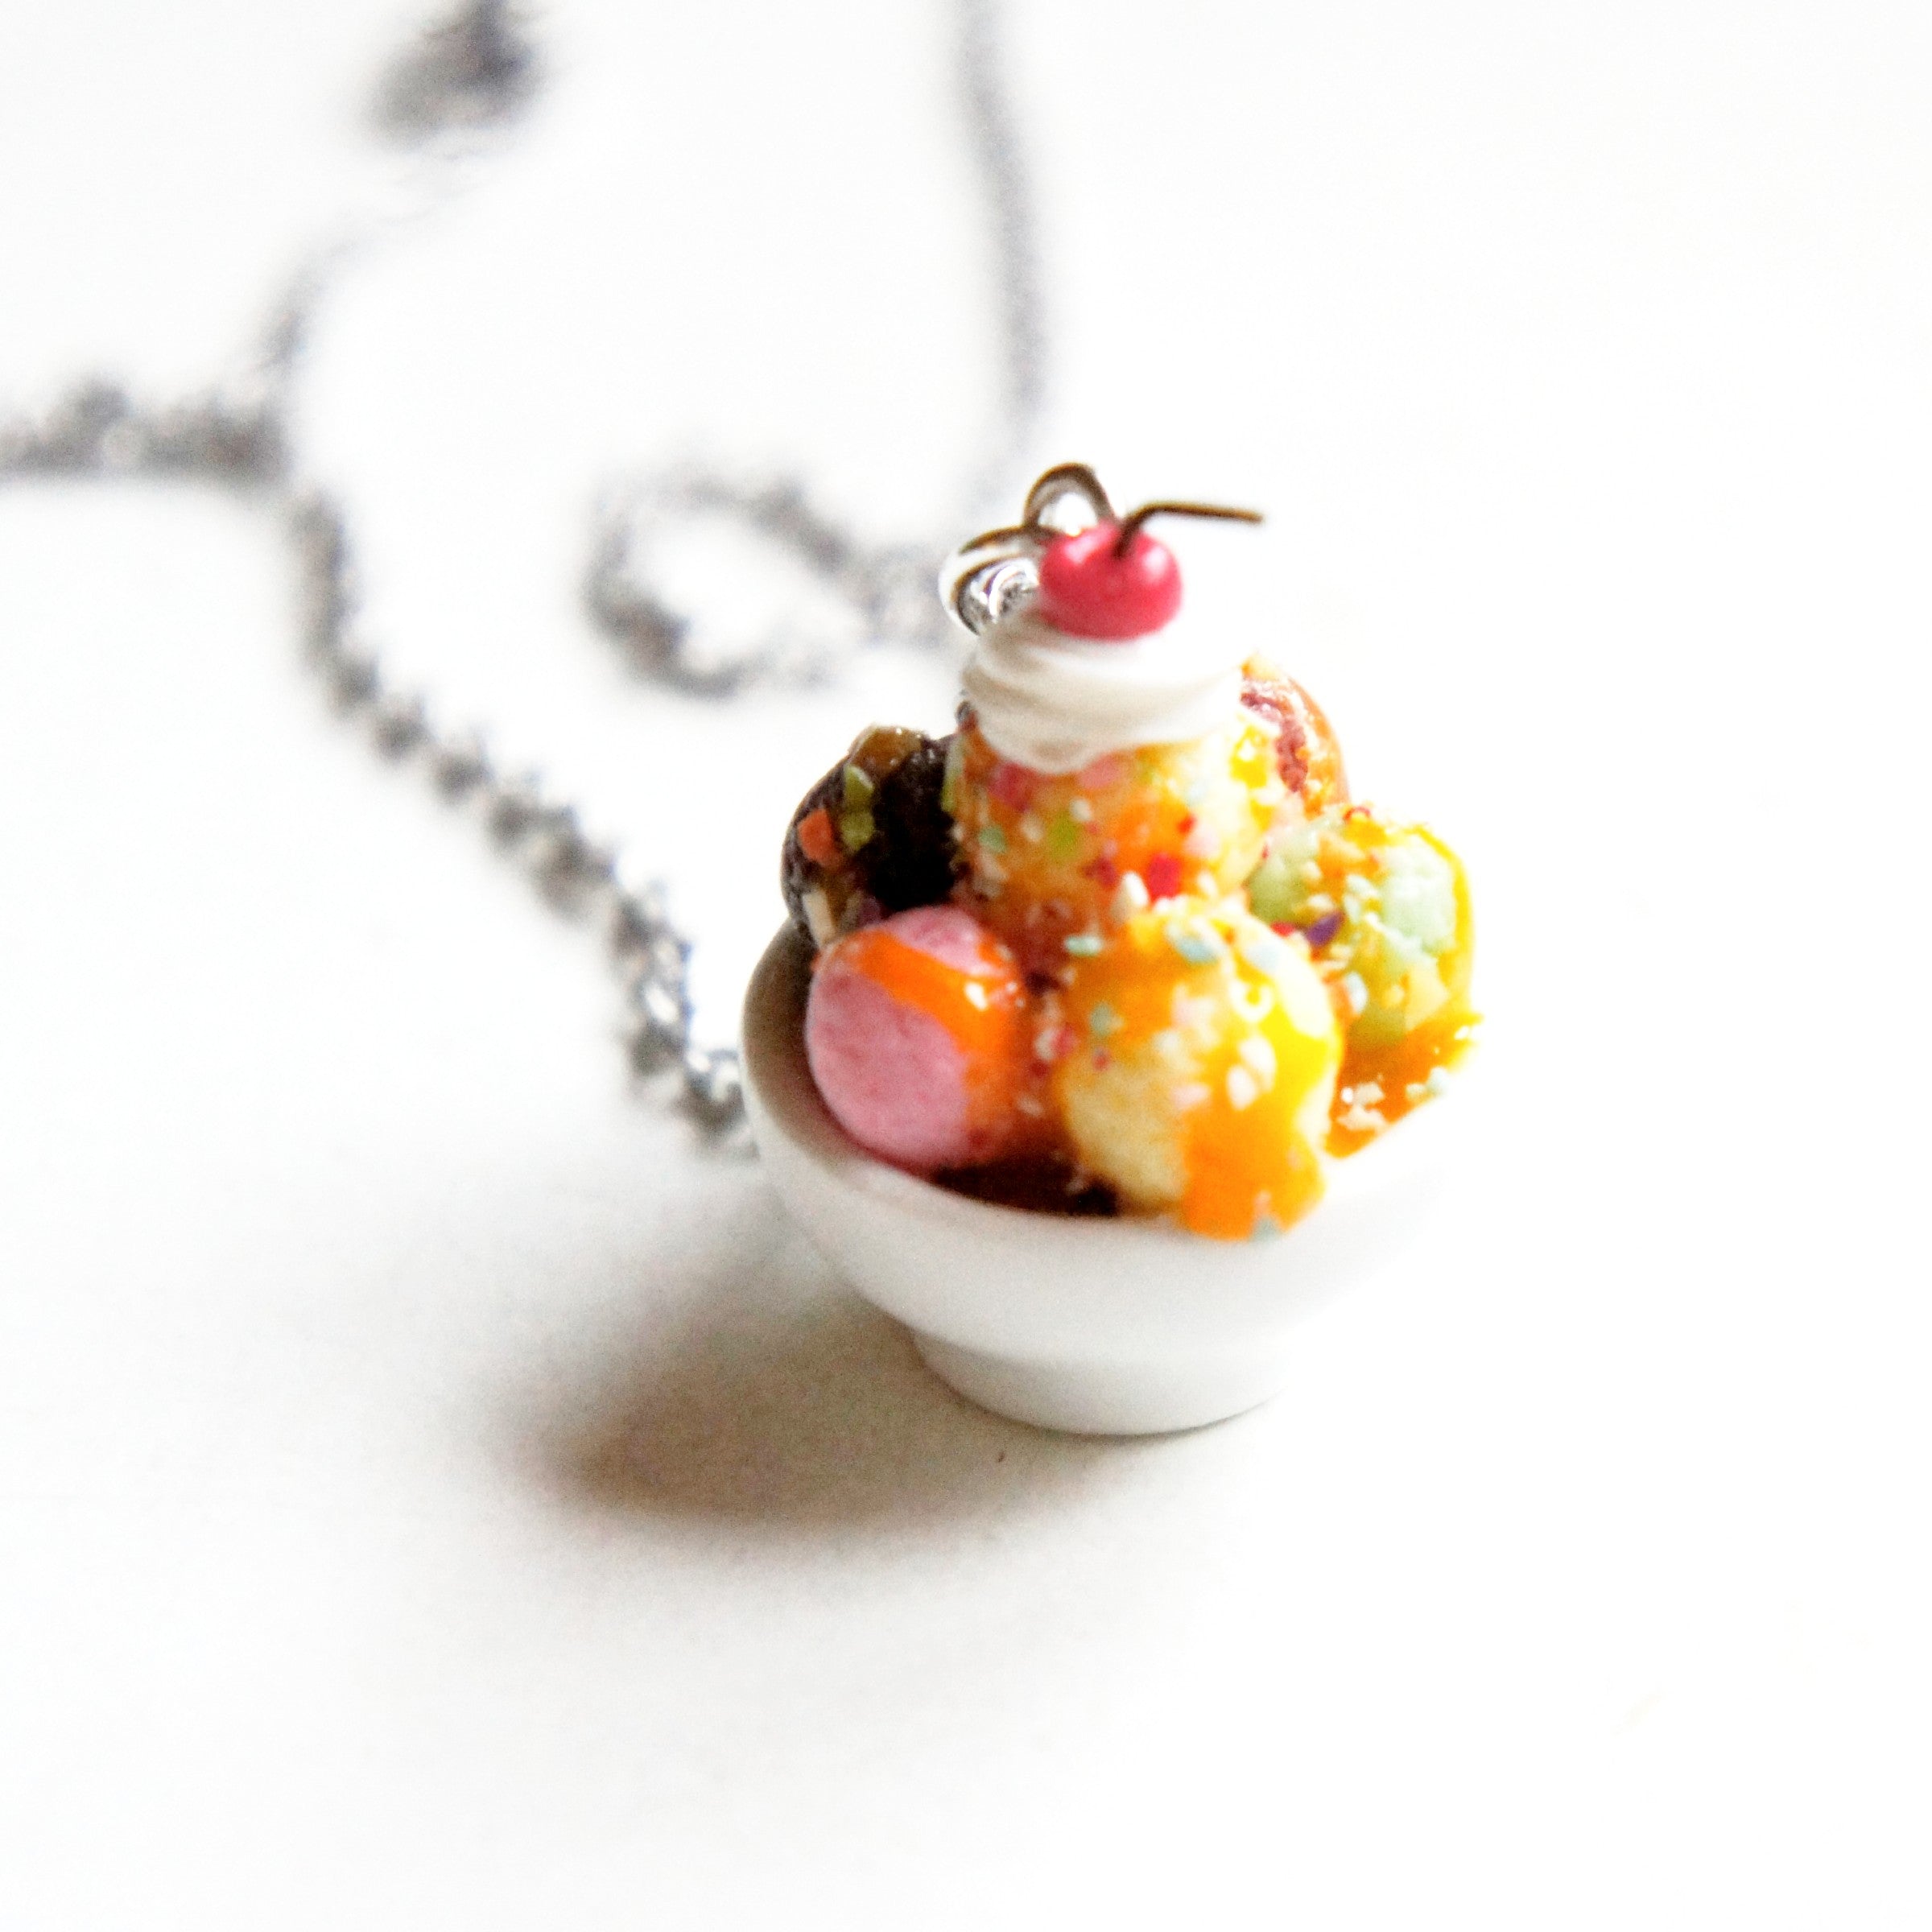 Ice Cream Sundae Necklace - Jillicious charms and accessories